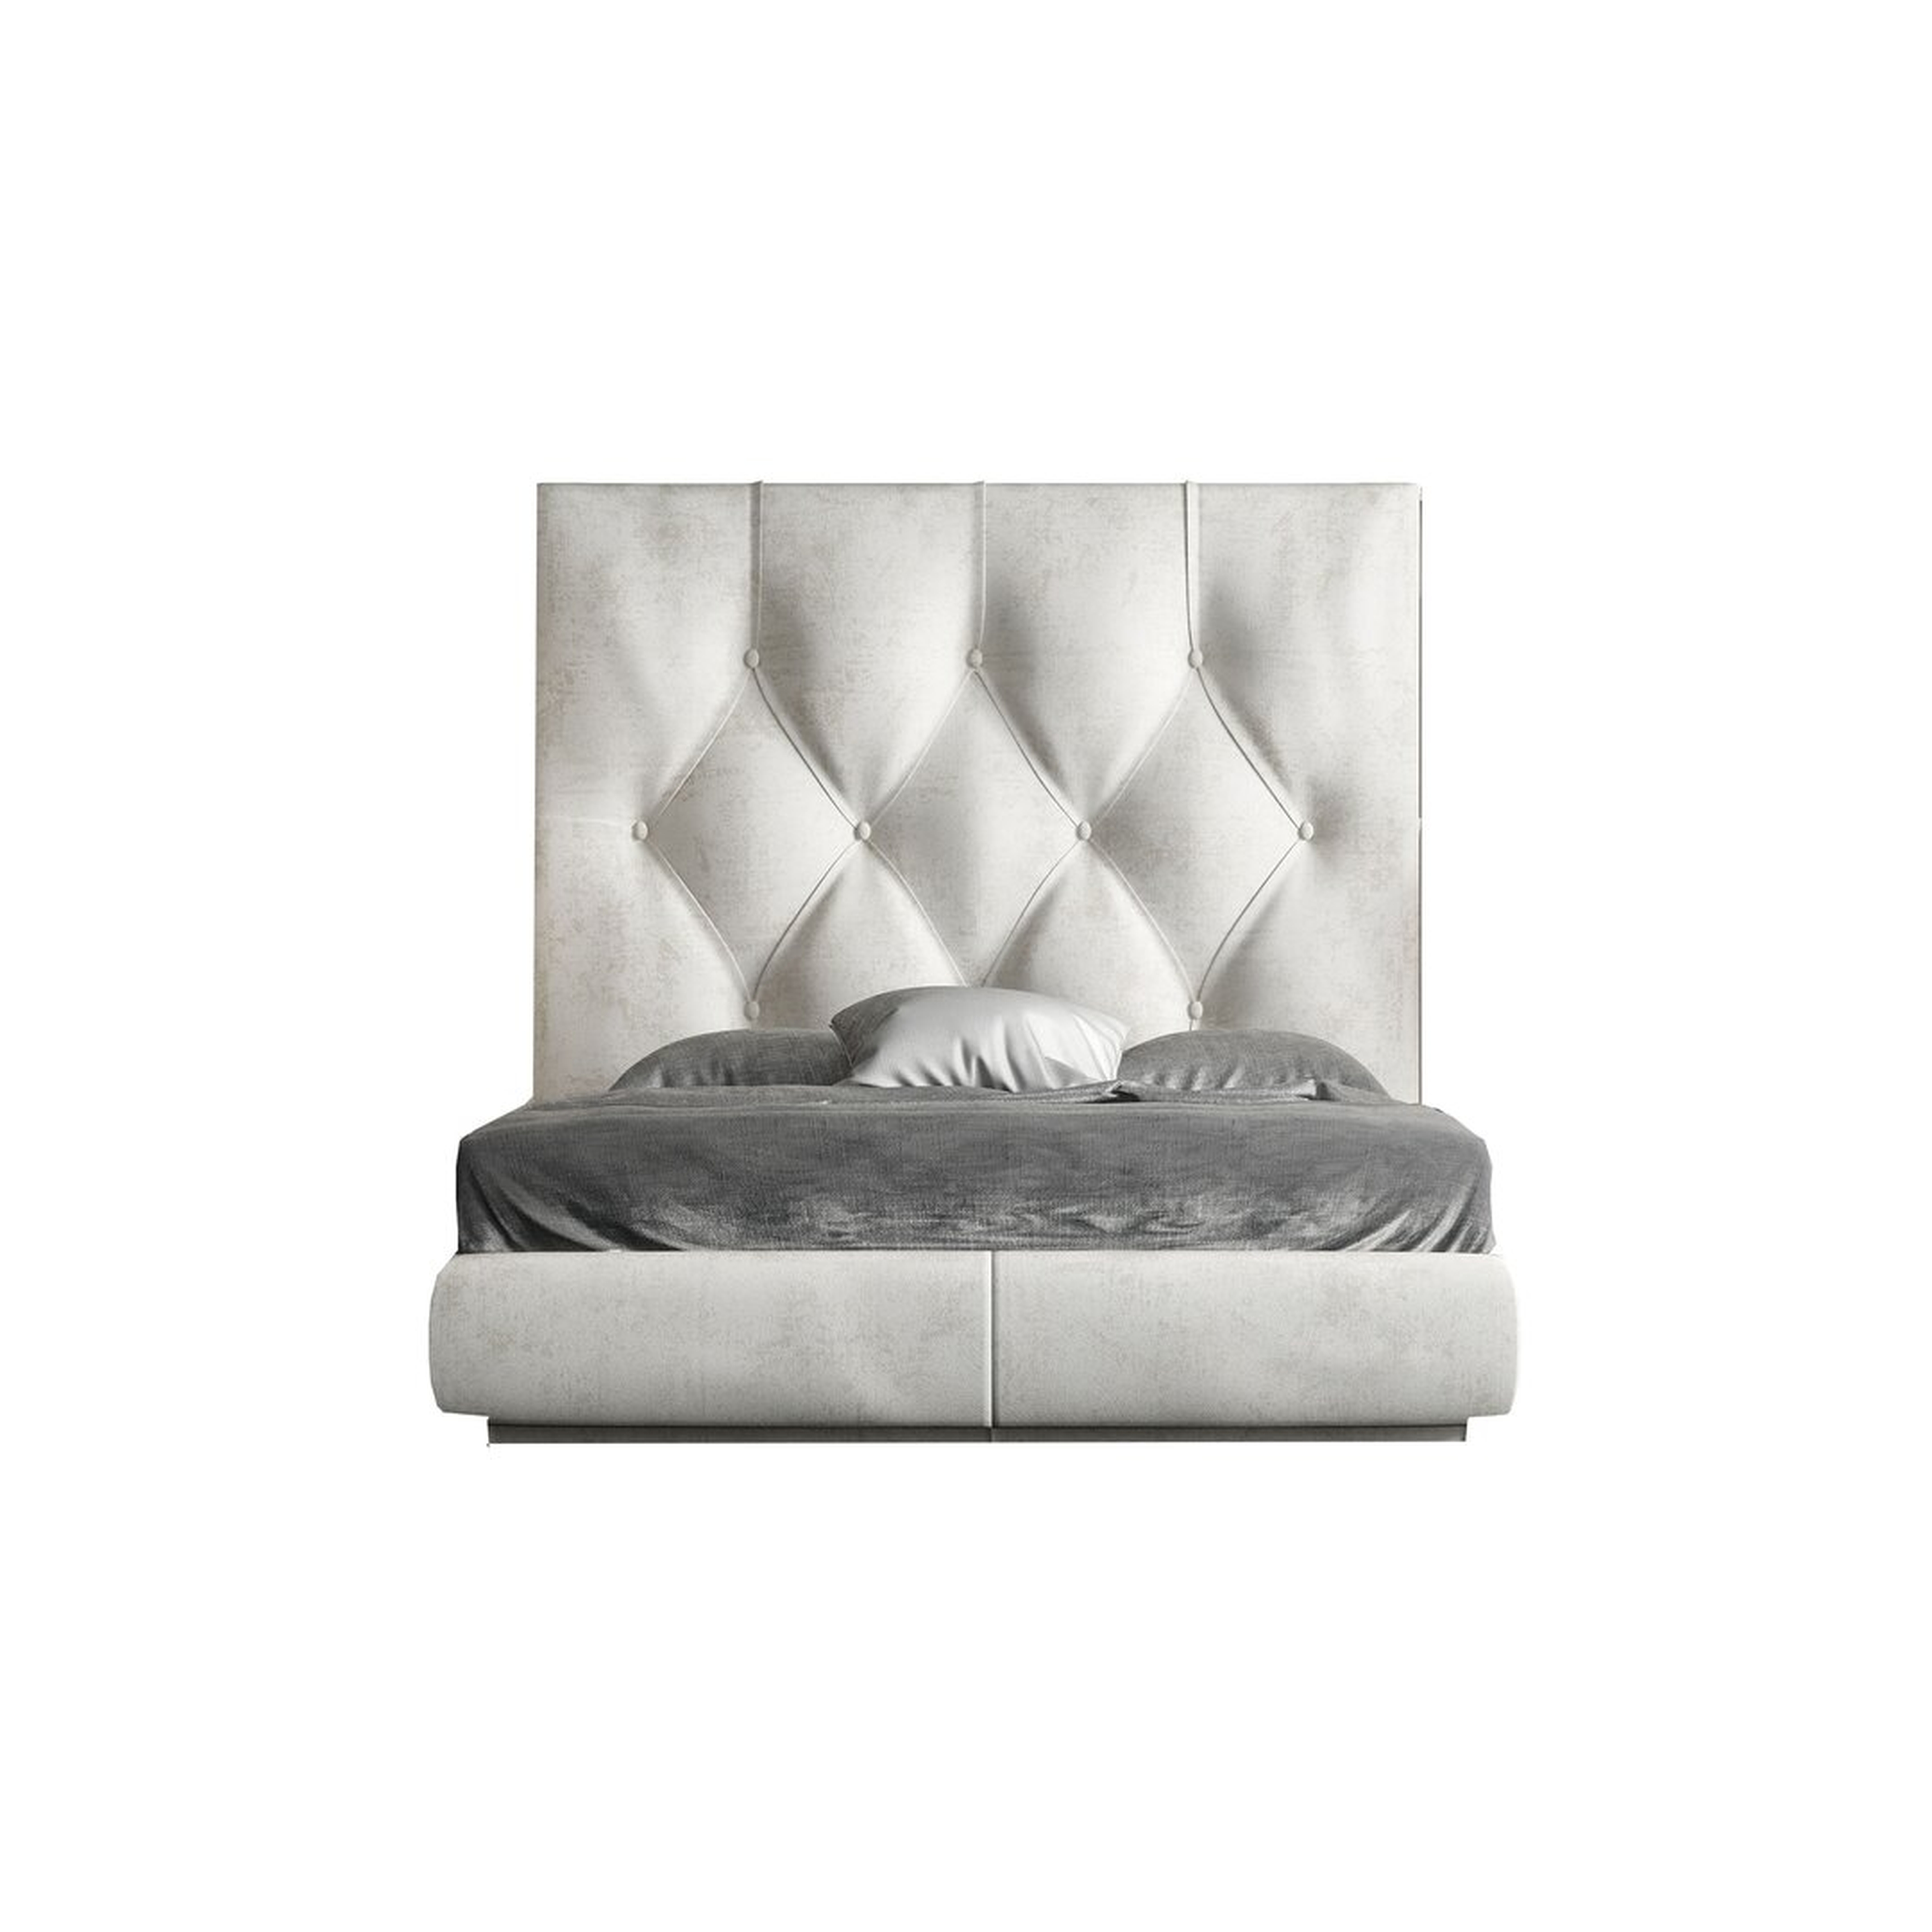 "Class Design Home London Bedroom Bed"-King - Perigold